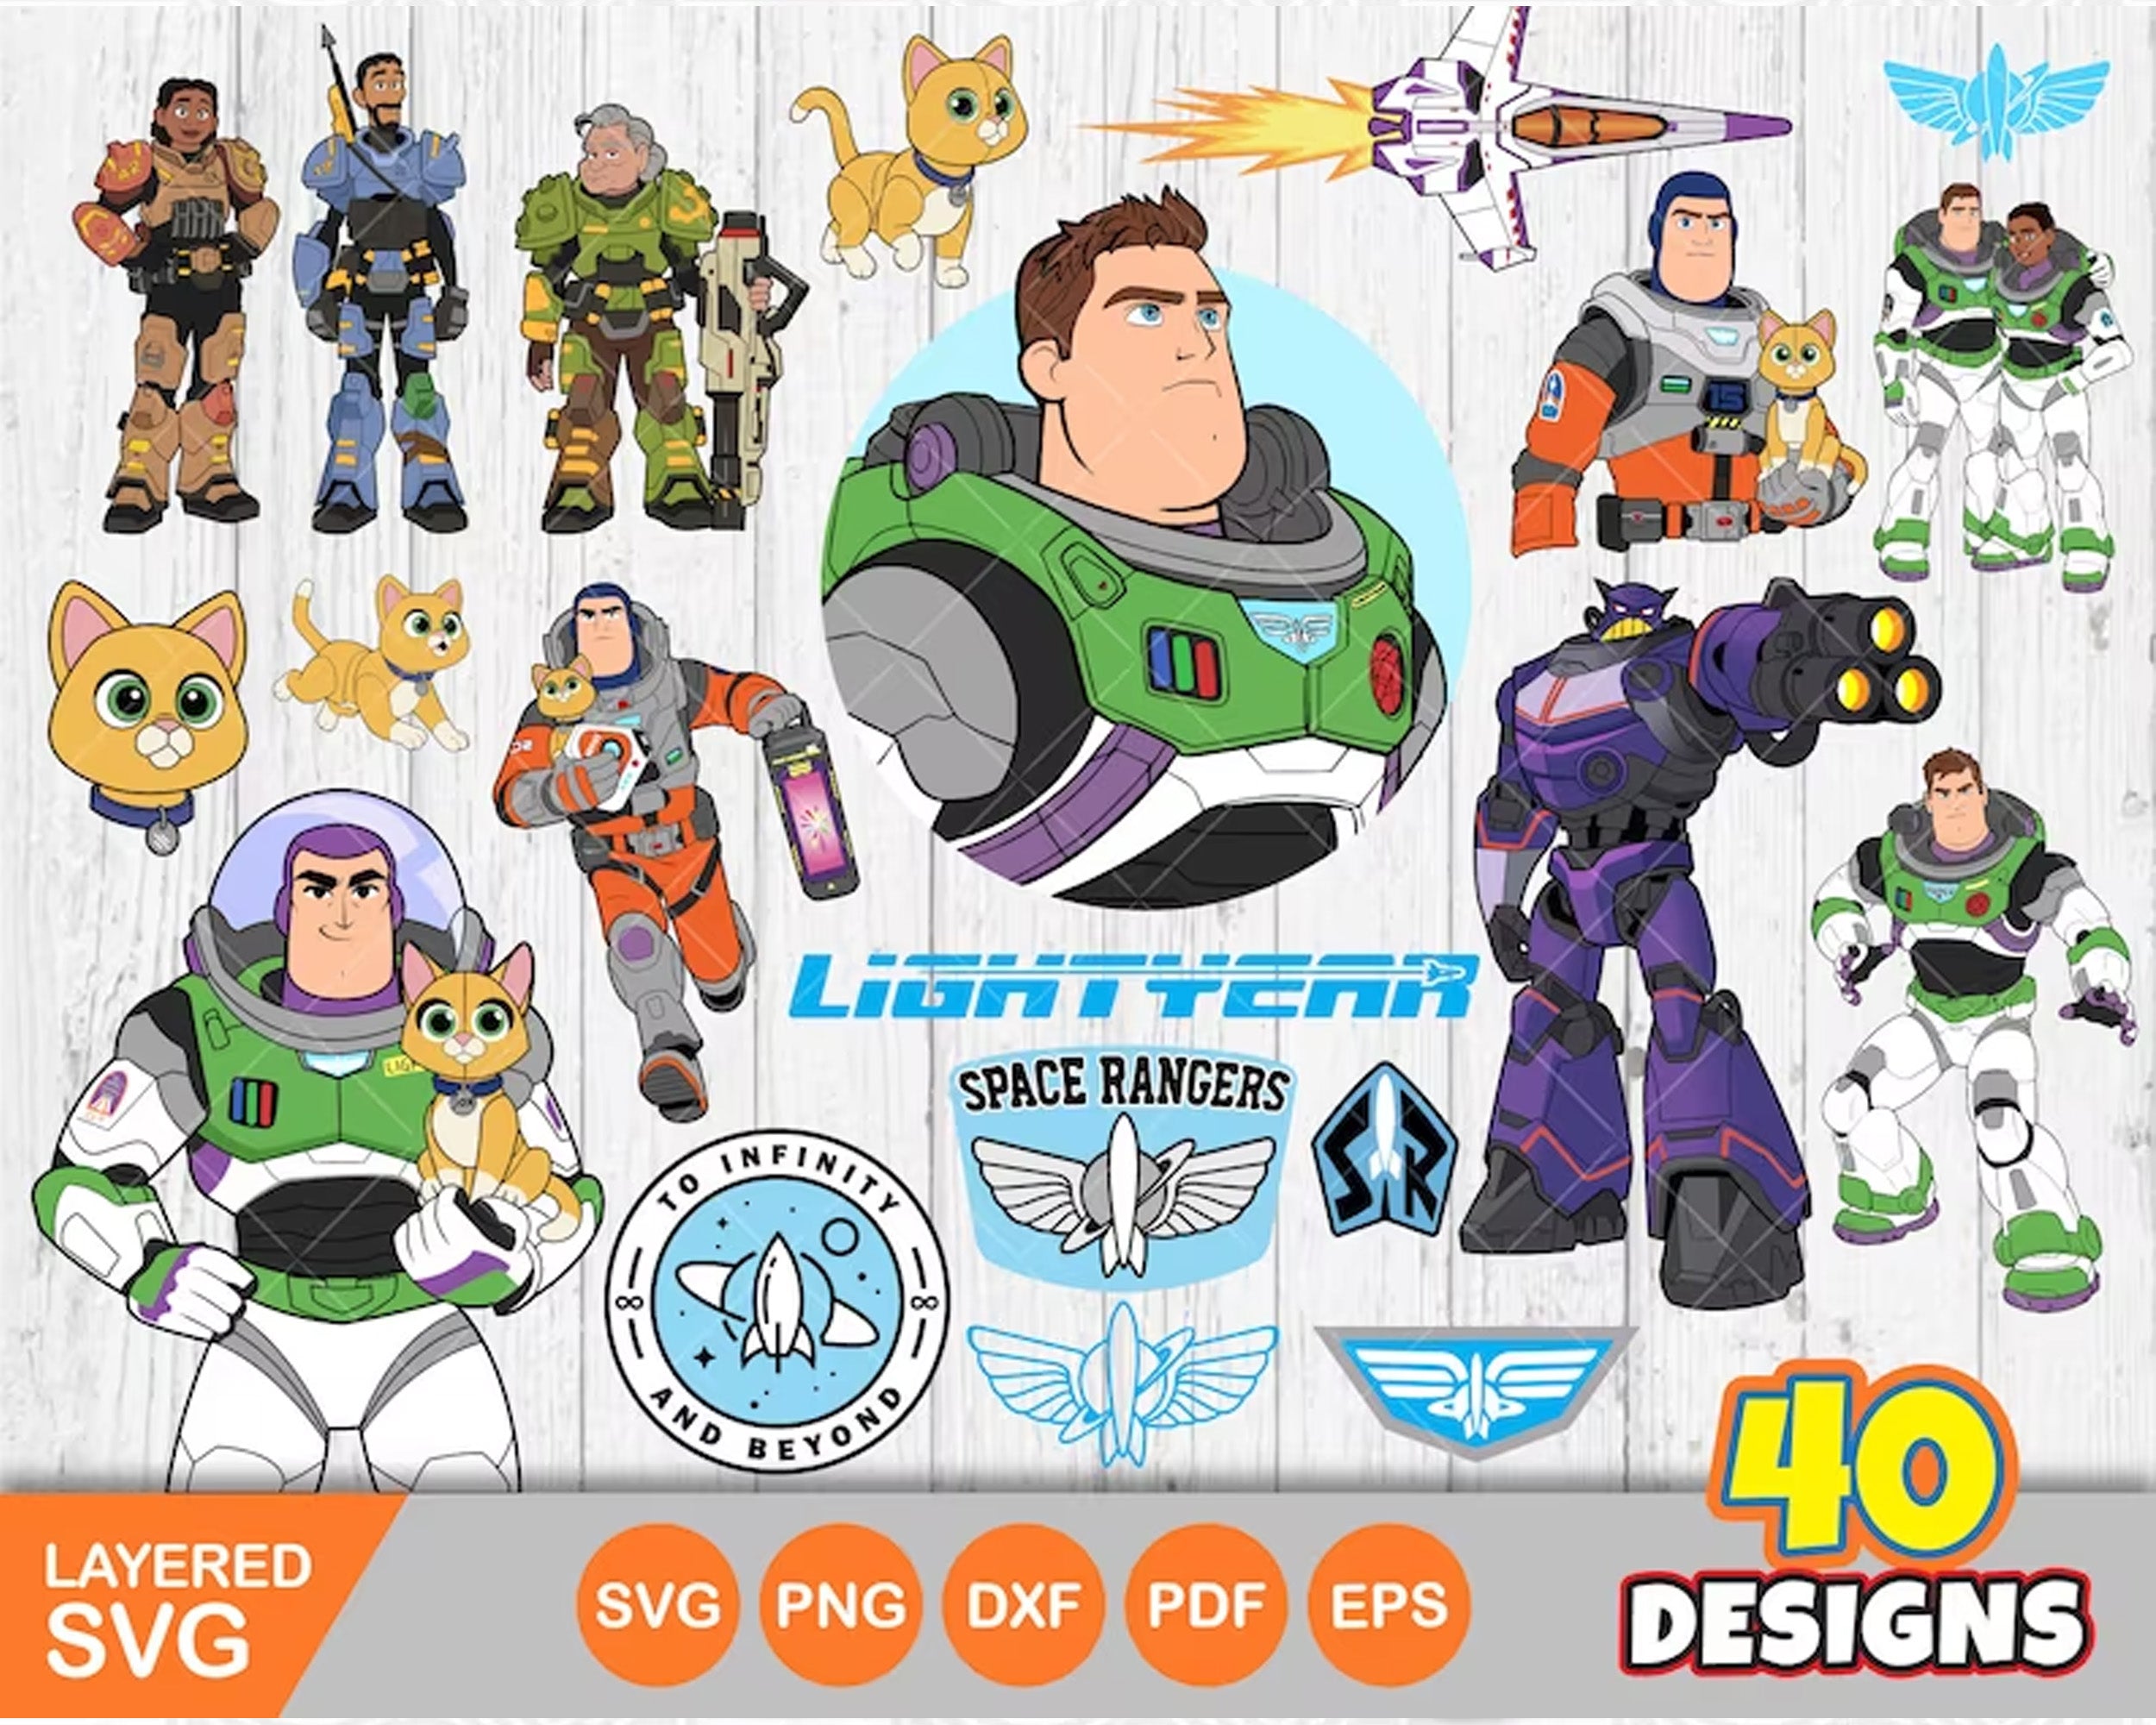 Lightyear SVG Layered Images Clipart PNG Instant Digital Download Buzz Lightyear cat Sox cricut shirts crafts